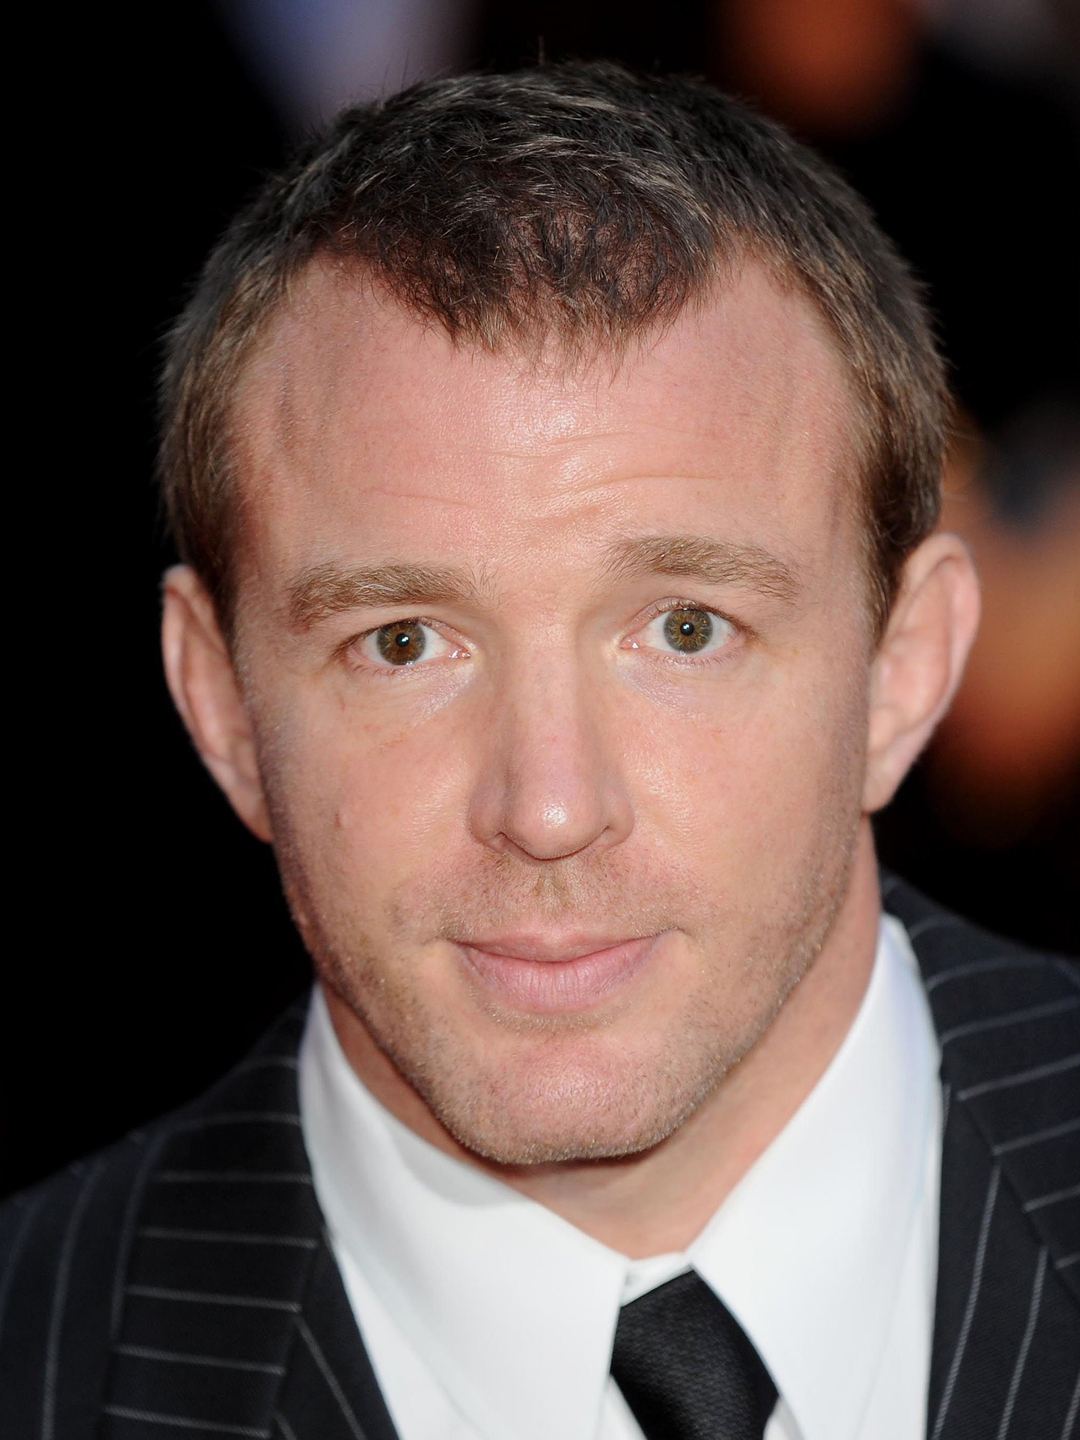 Guy Ritchie childhood story